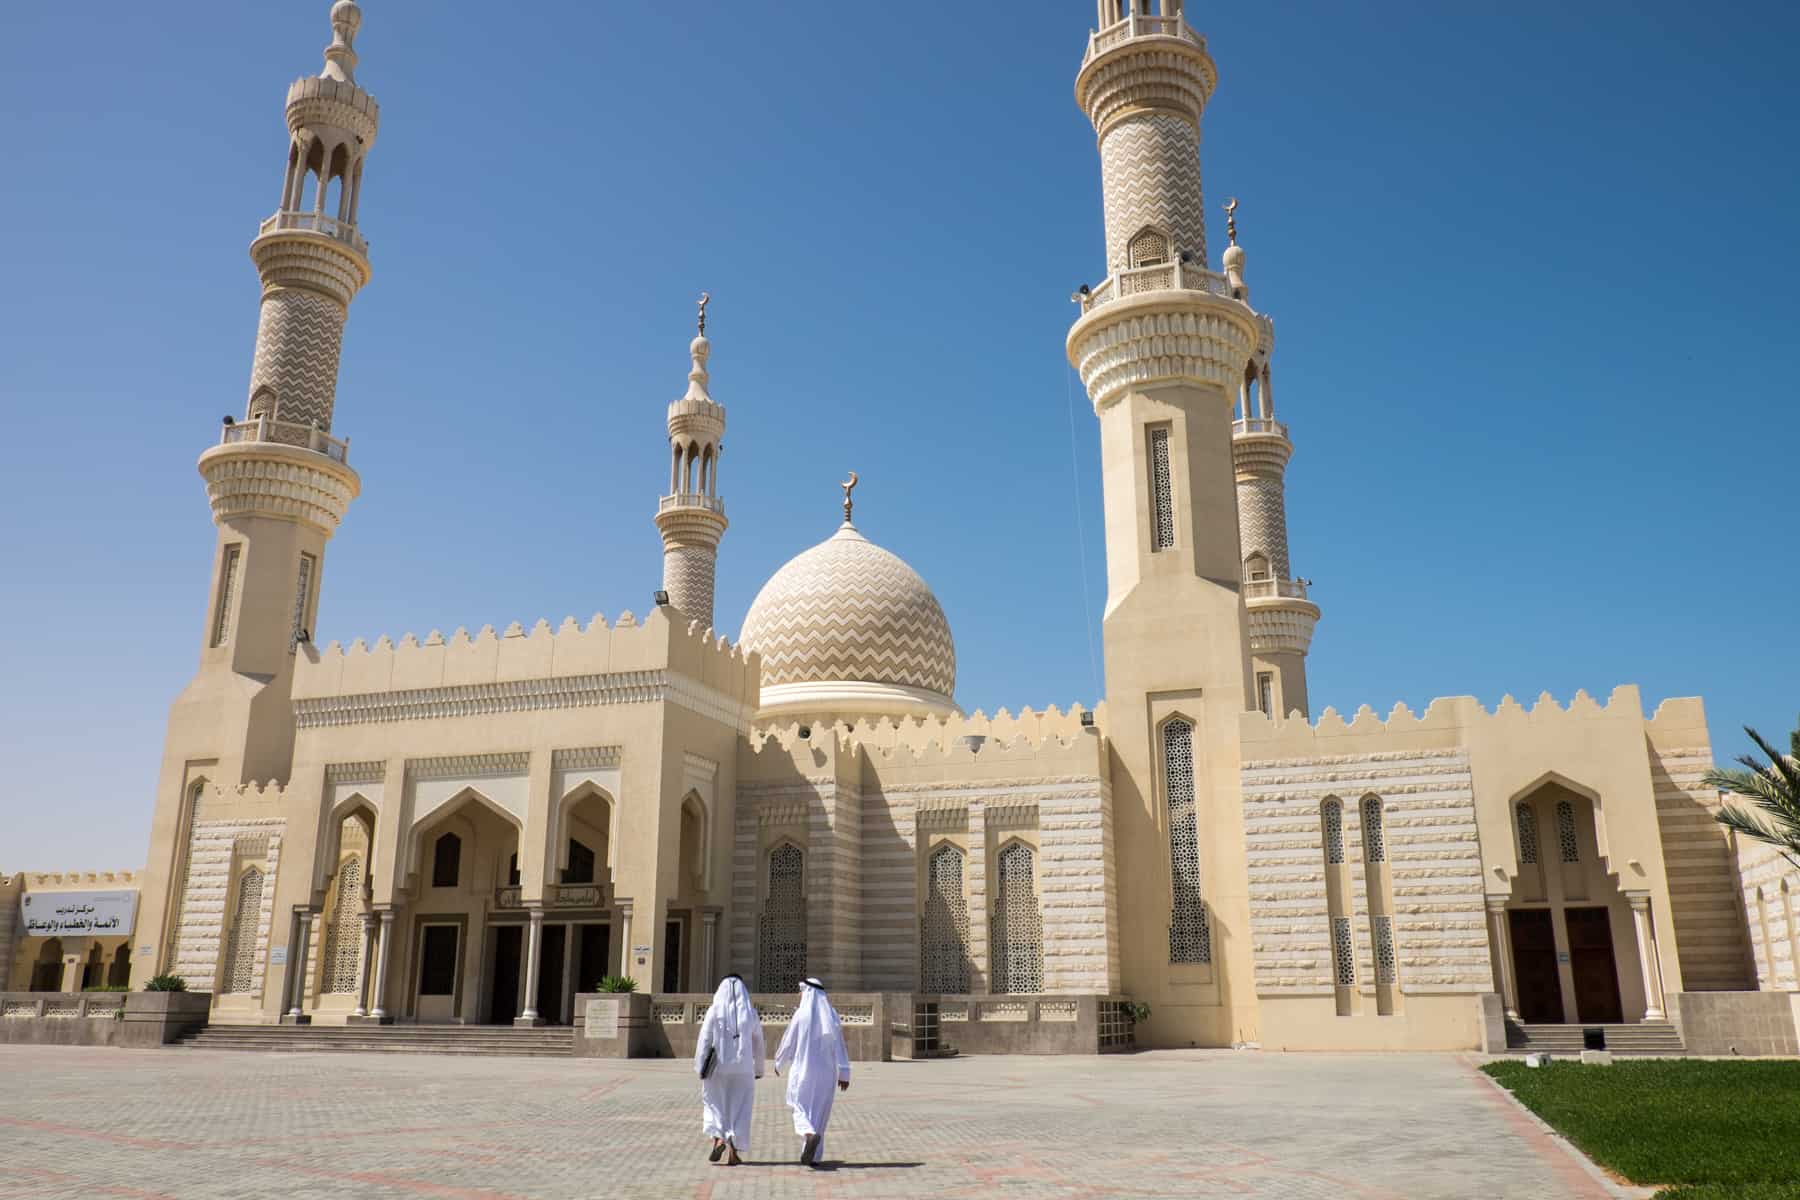 Two men in white approach the light yellow Shaikh Zayed Mosque in Ras Al Khaimah